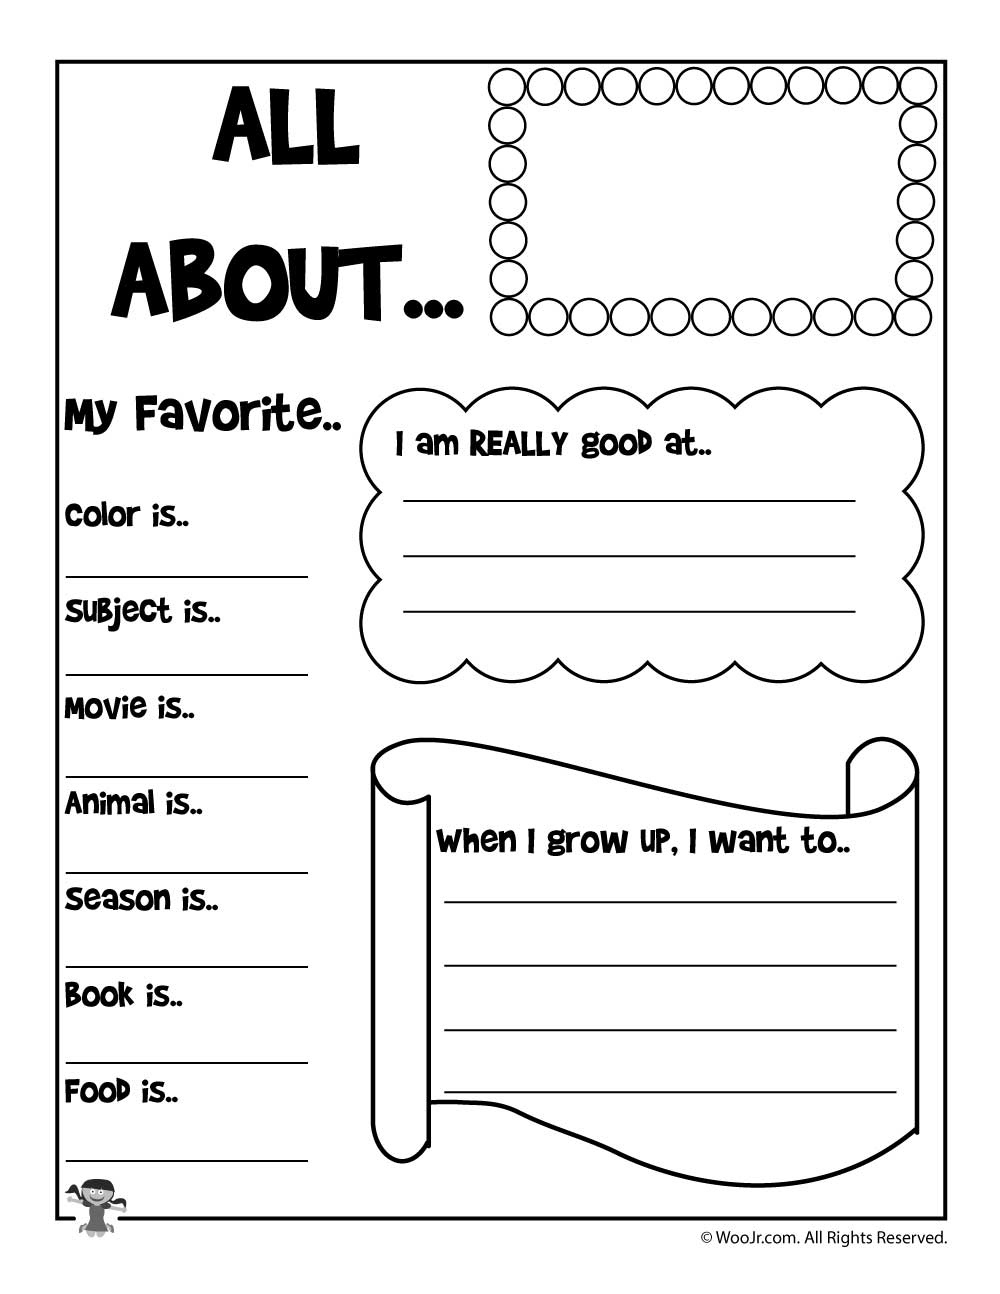 about-me-worksheet-for-kids-all-about-me-worksheets